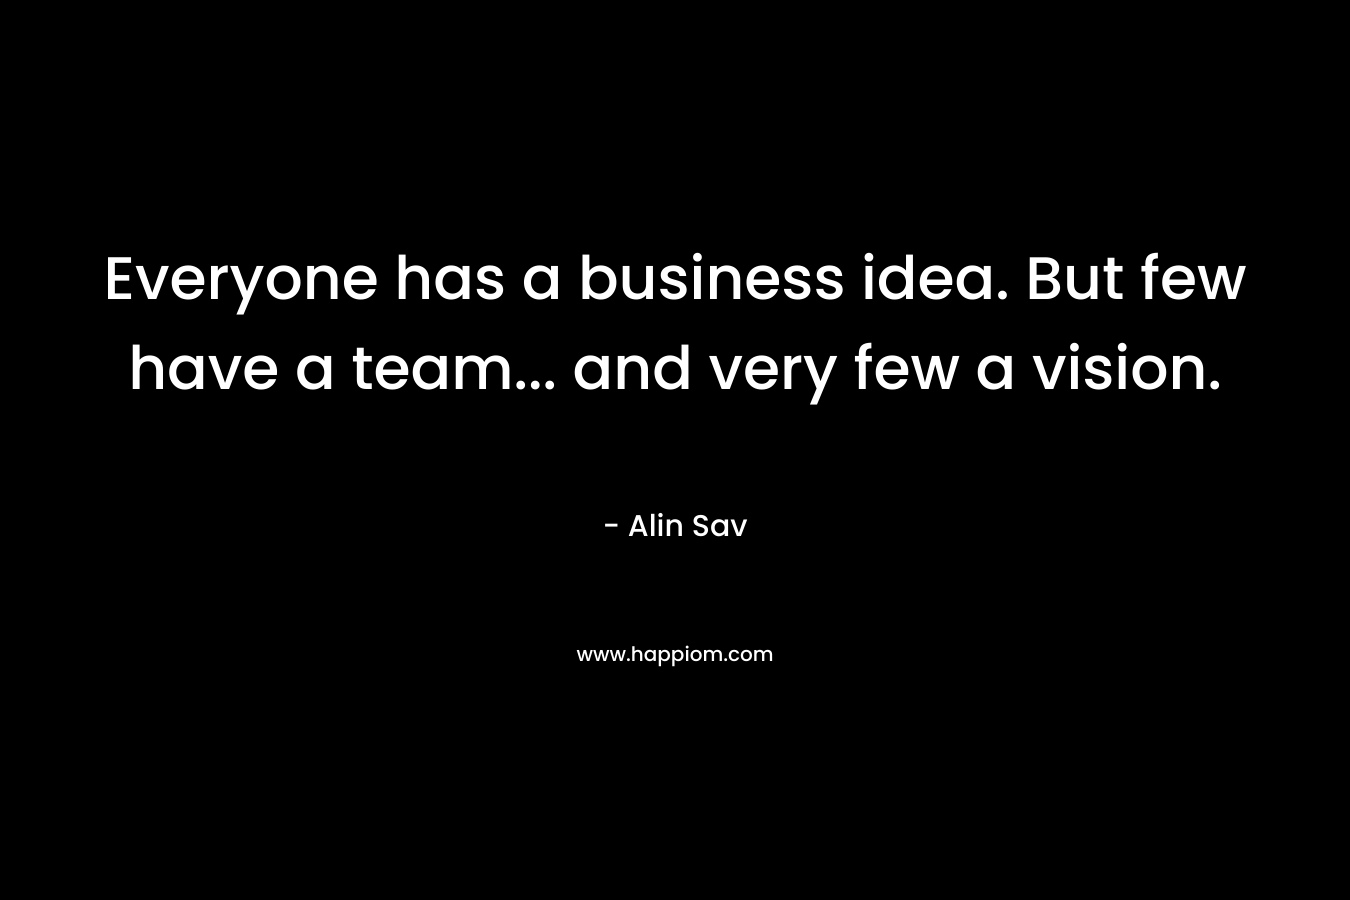 Everyone has a business idea. But few have a team... and very few a vision.